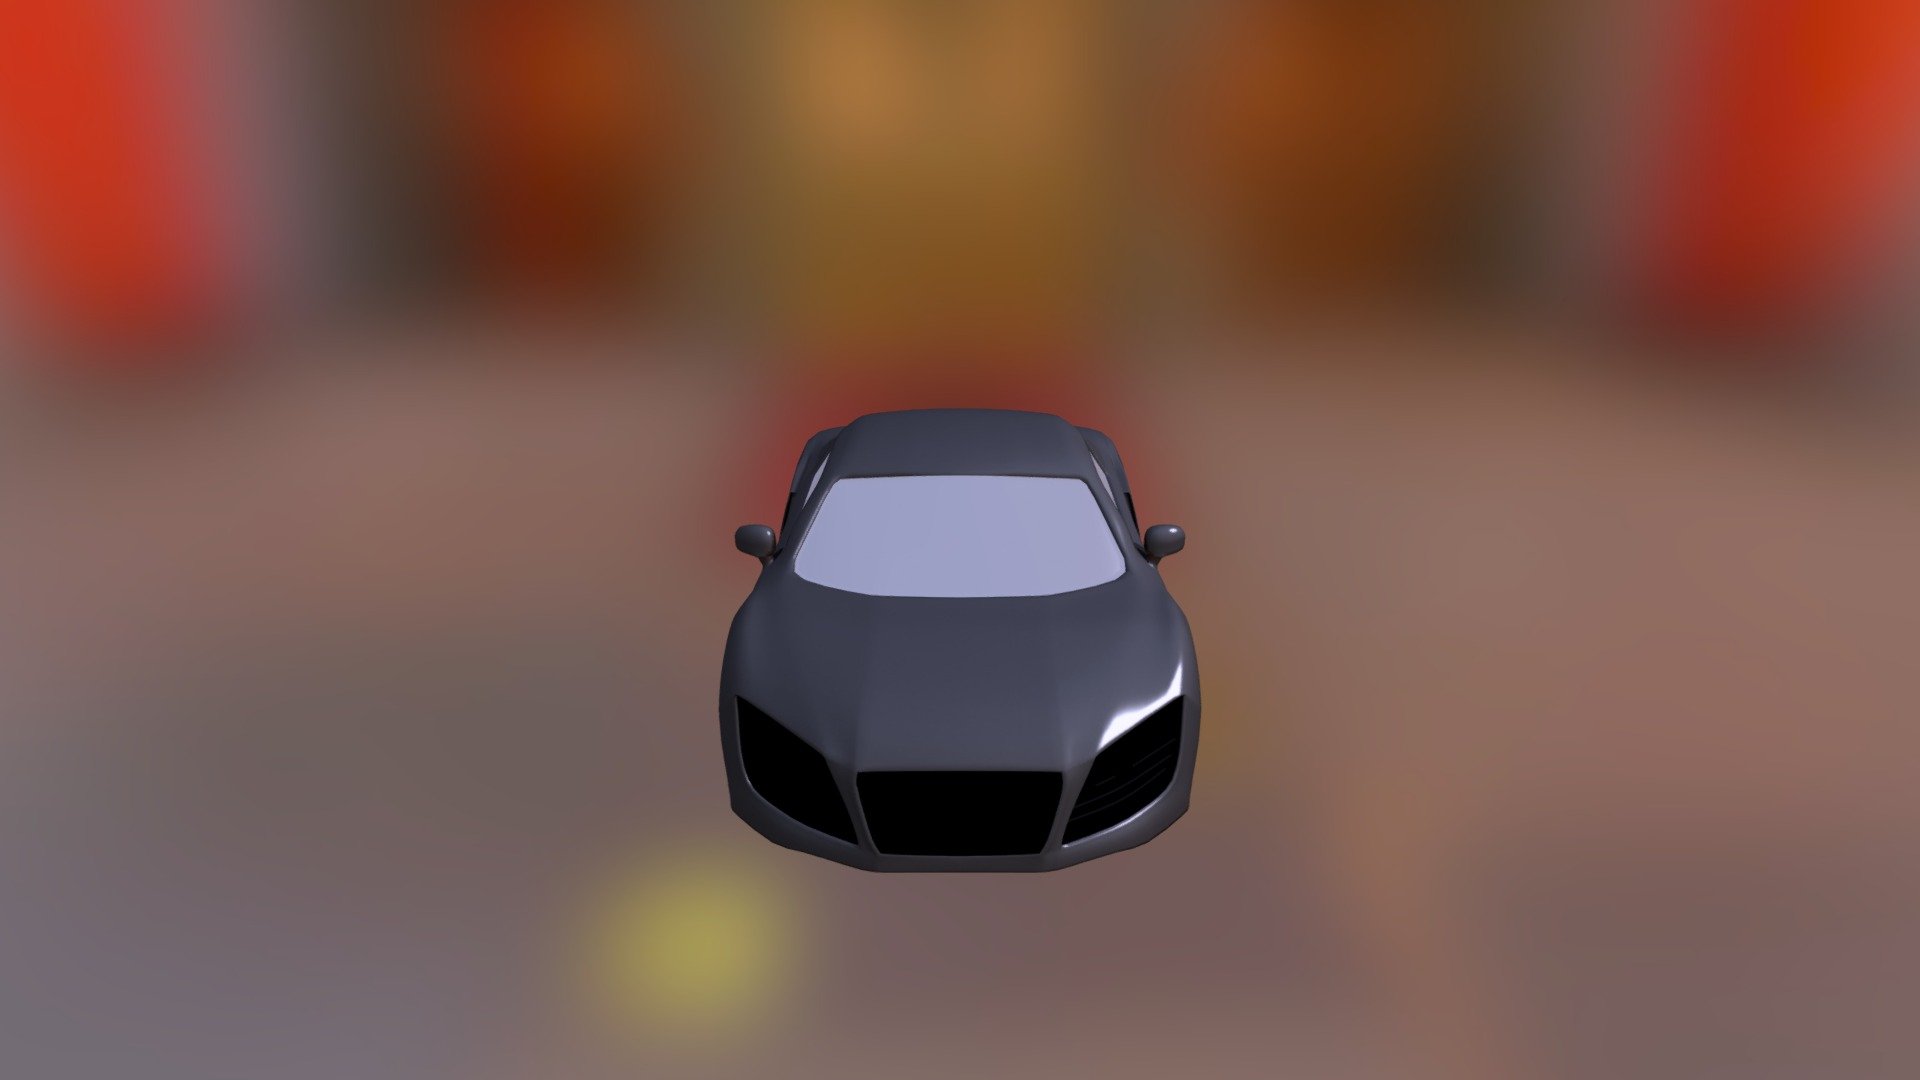 My improved car modelling